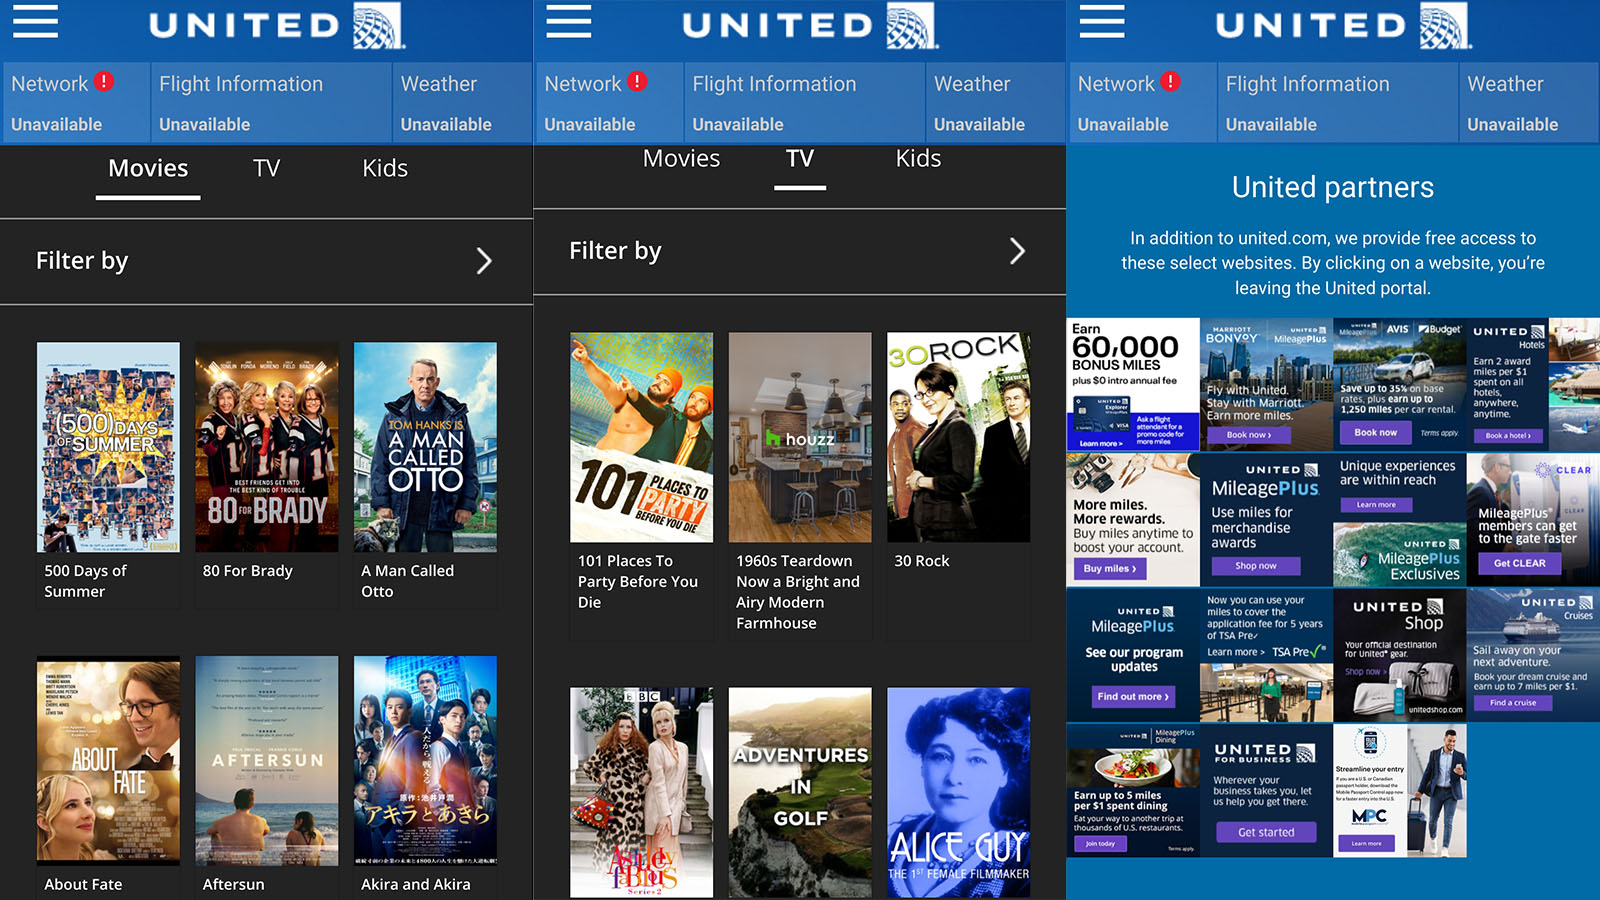 Screenshots of streaming movie choices on United